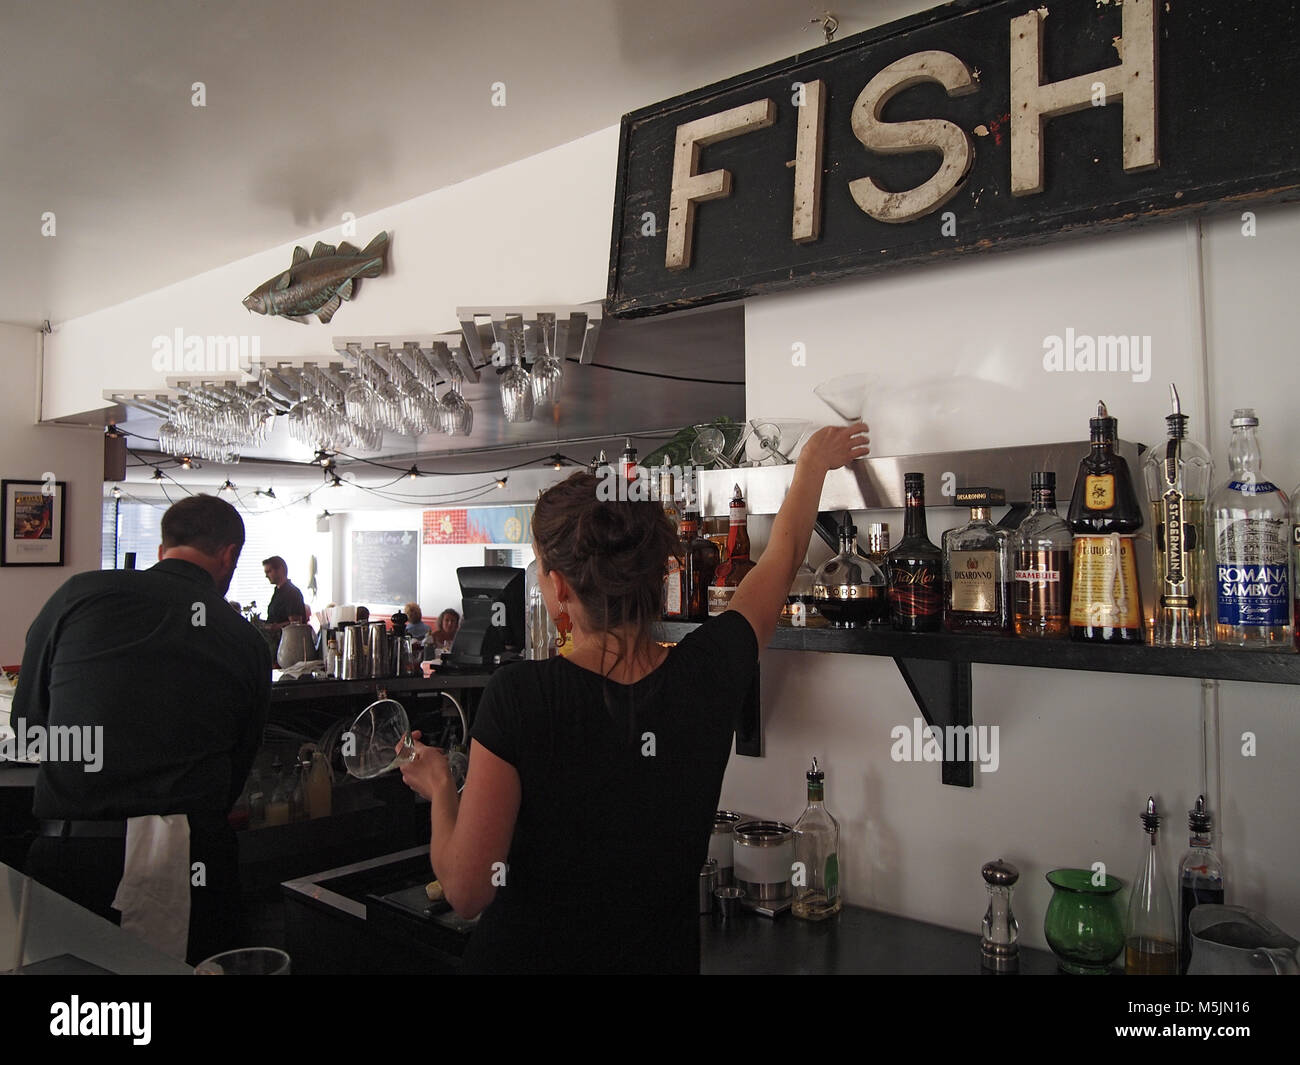 Bartender at work at Jumpin Jays Fish reataurant in Portsmouth New Hampshire. Stock Photo